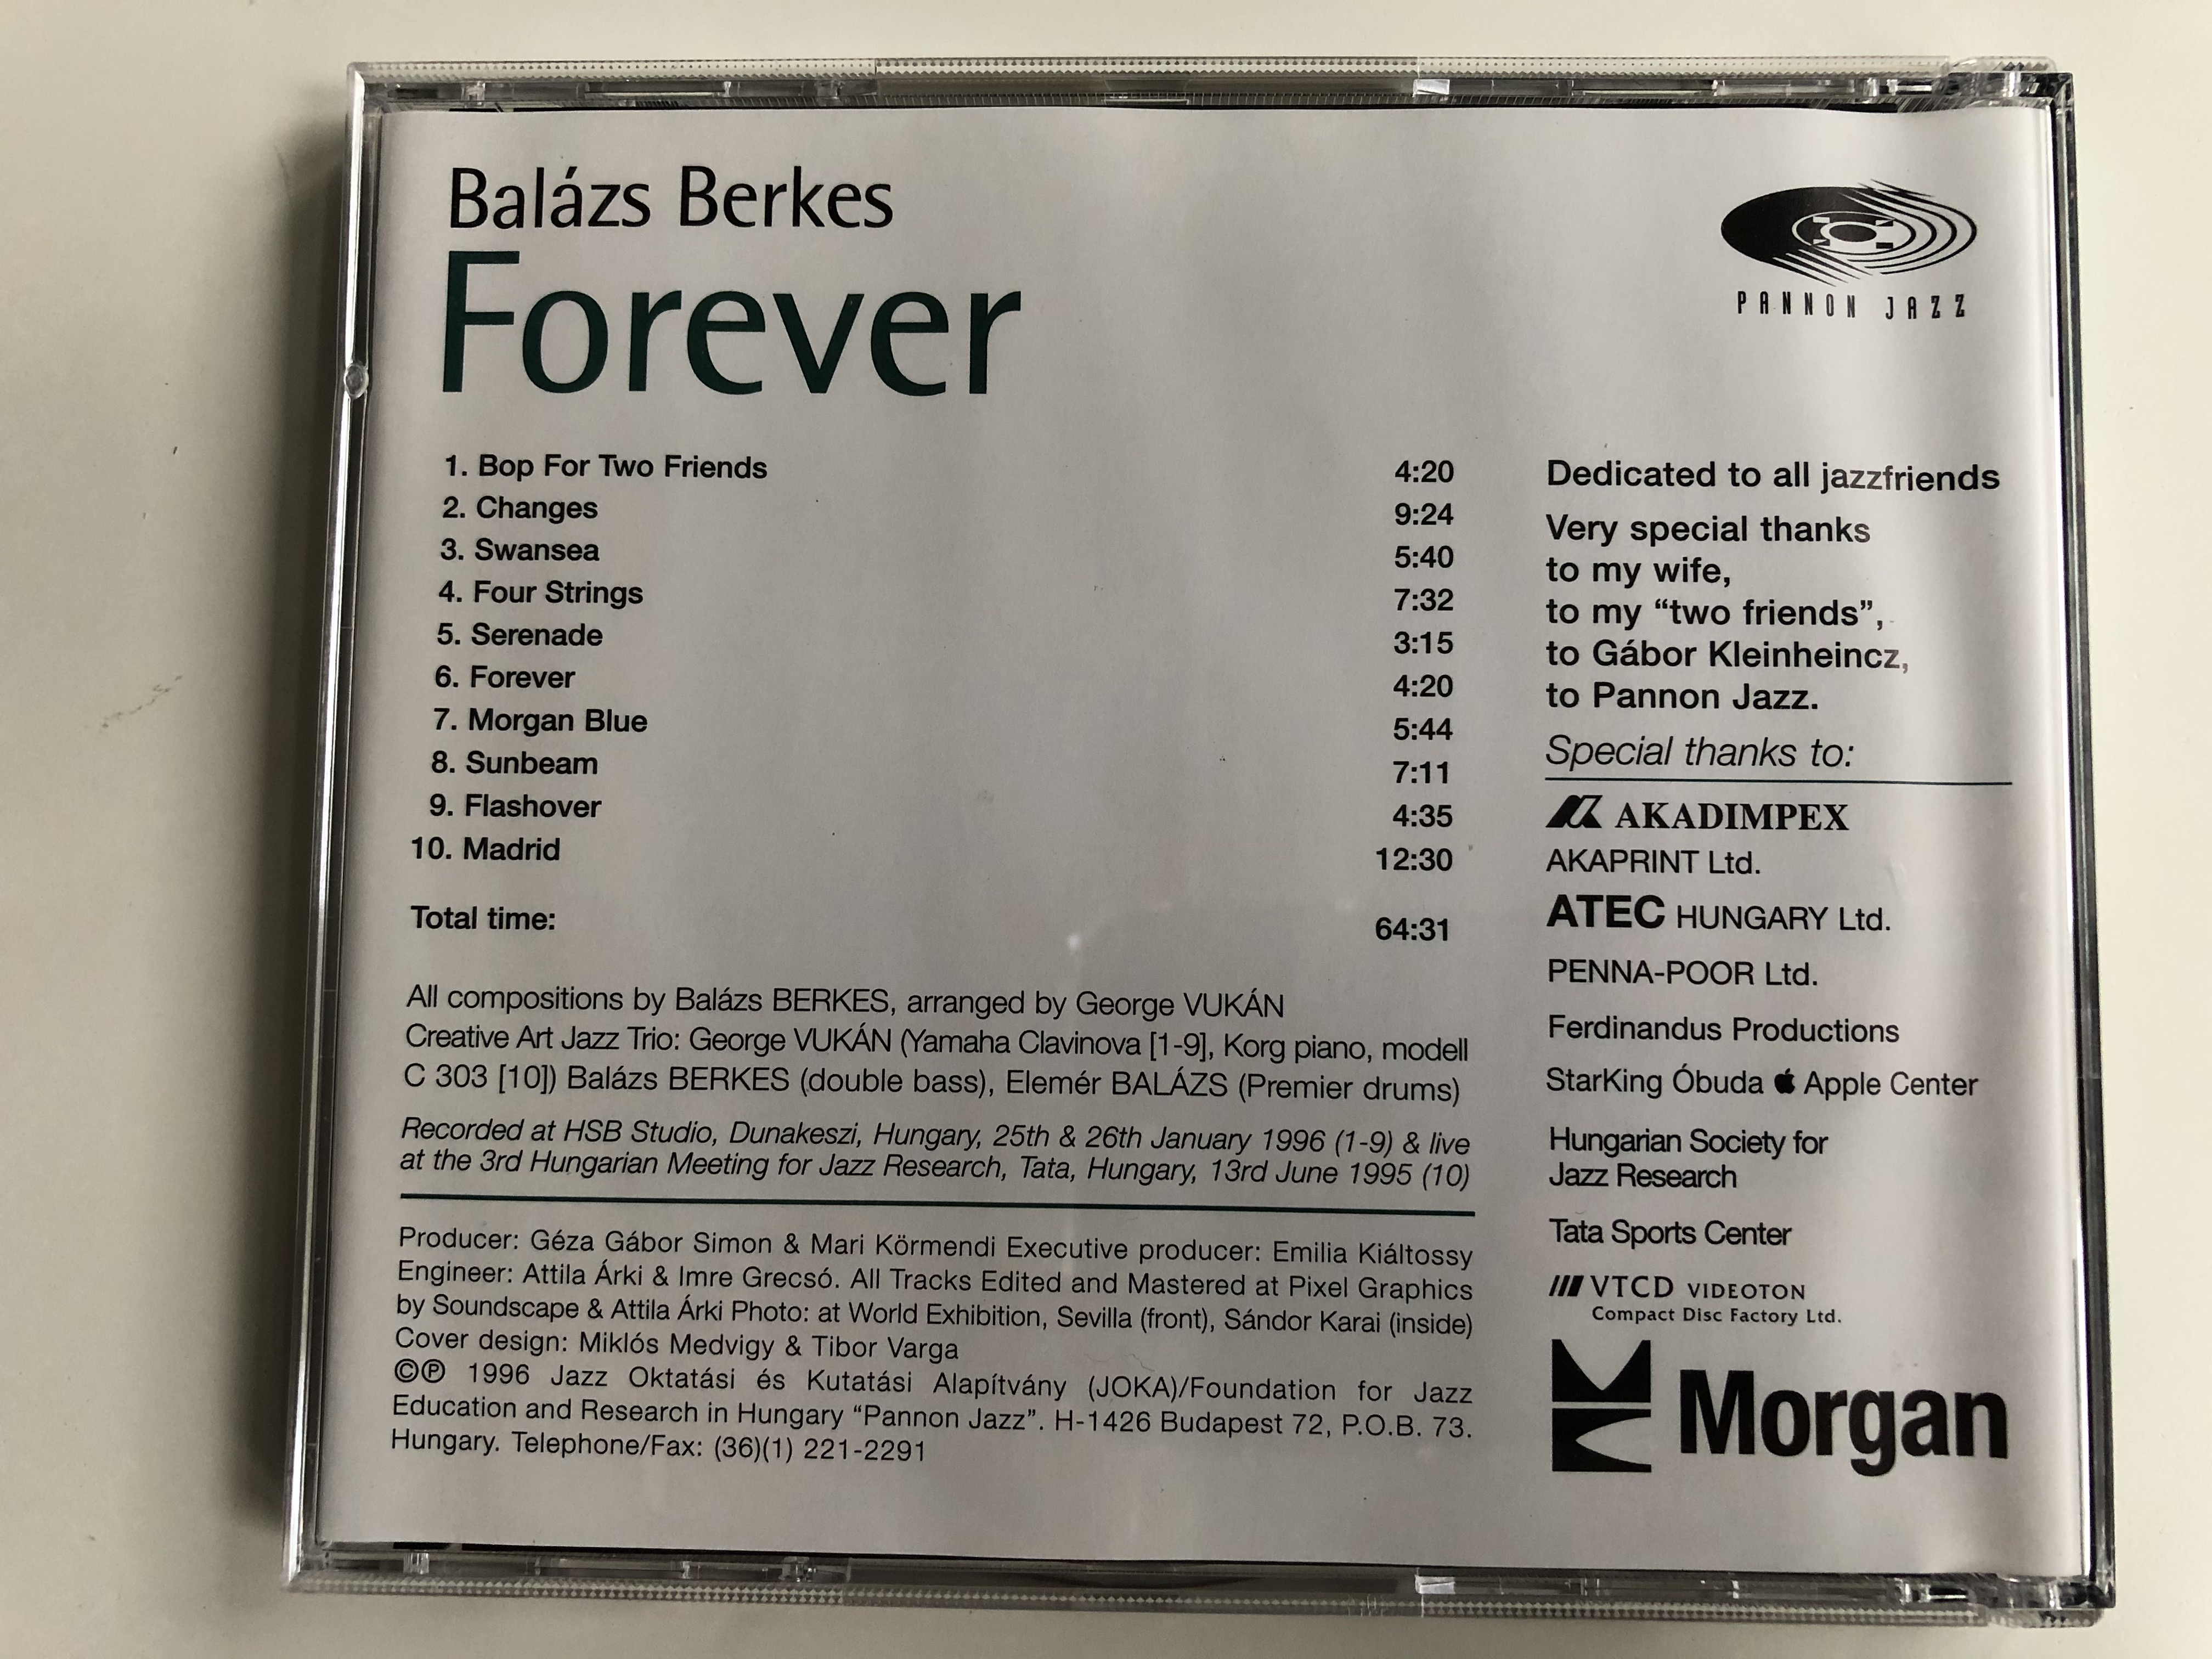 foundation-for-jazz-education-and-resarch-in-hungary-presents-bal-zs-berkes-forever-featuring-the-creative-art-jazz-trio-pannon-jazz-audio-cd-1996-pj-1016-5-.jpg